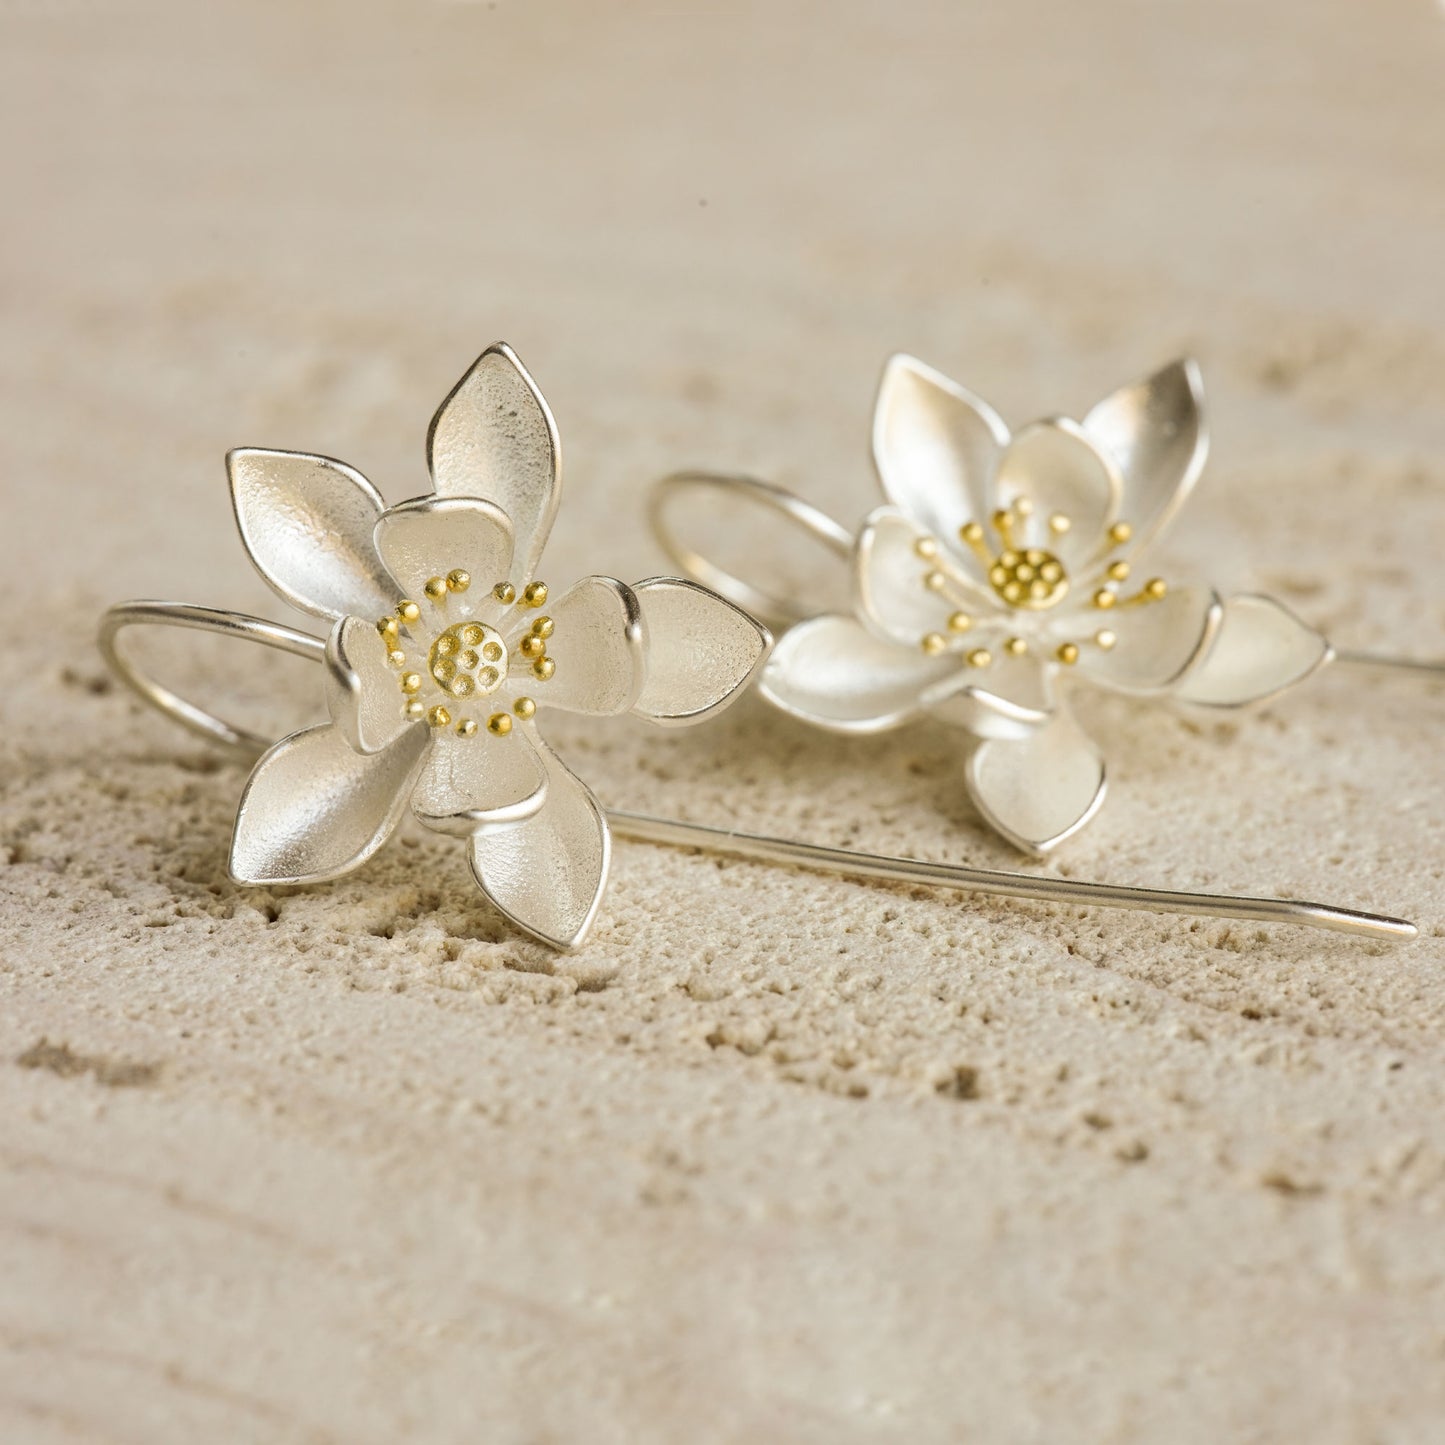 A pair of silver water lily earrings on a stone slab